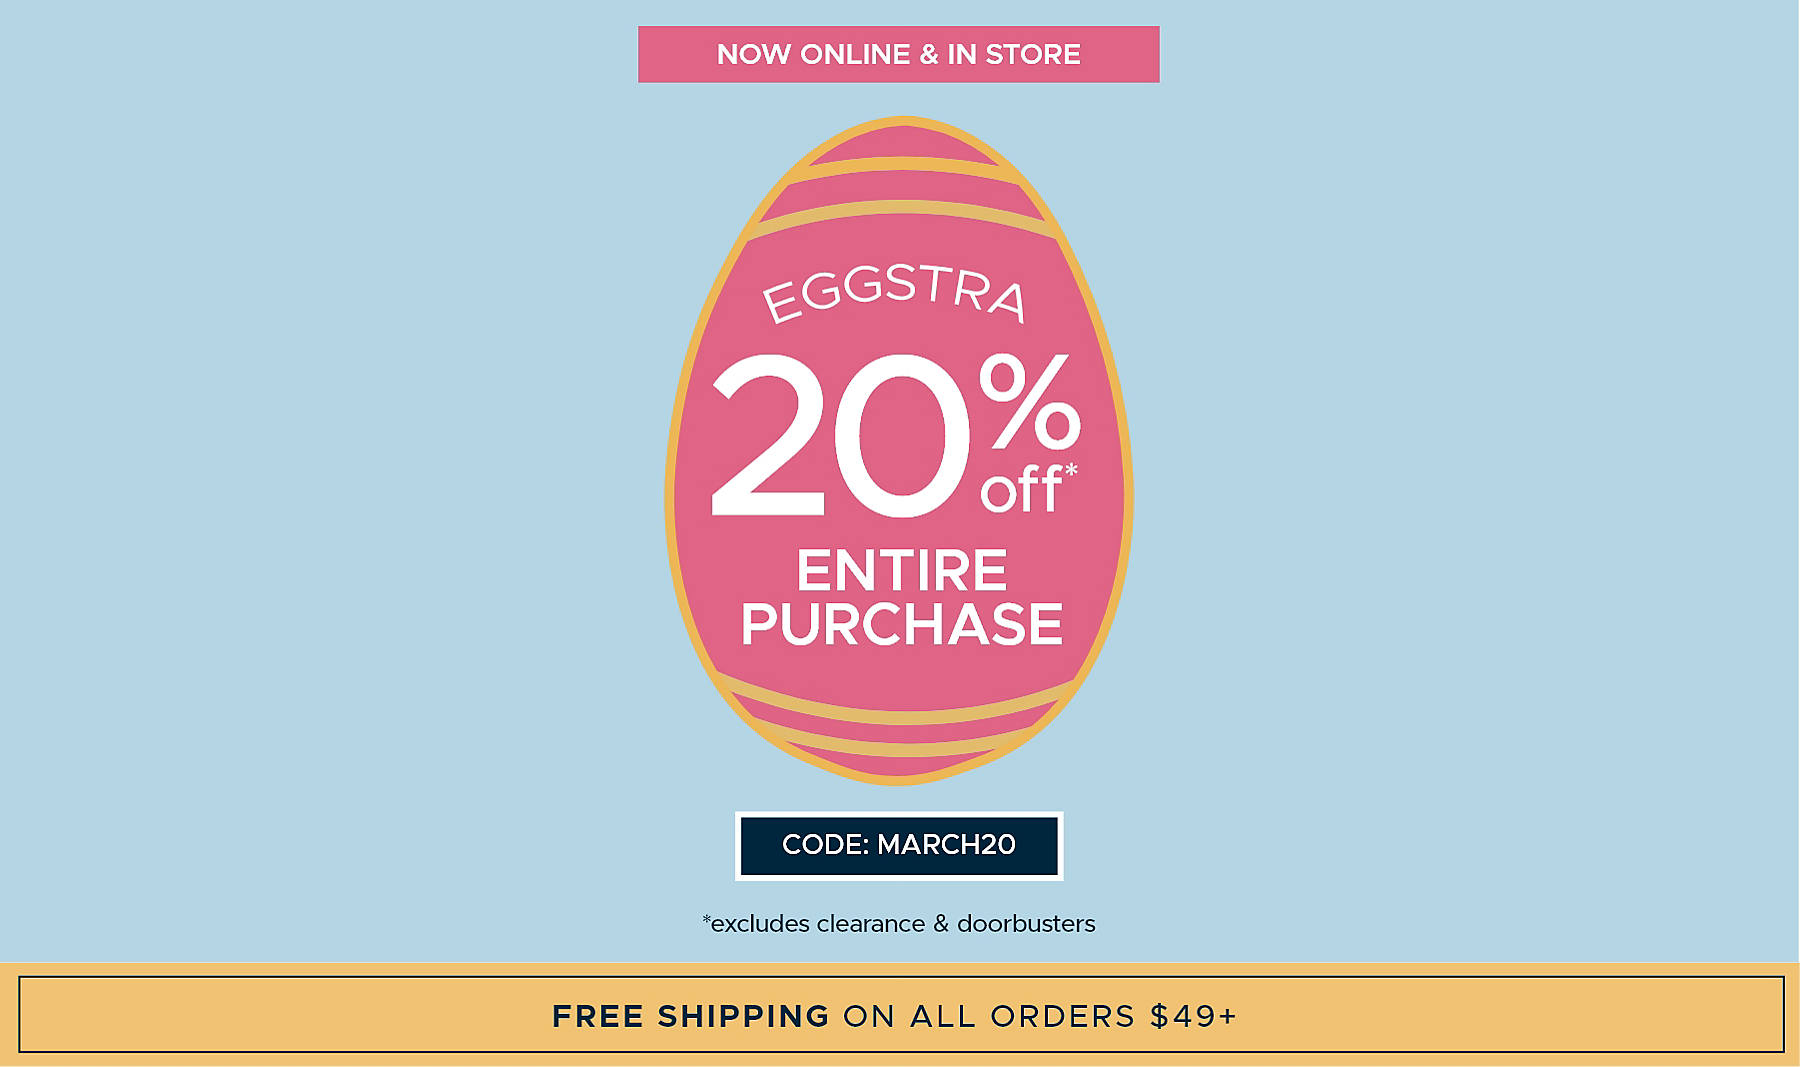 Now Online & In Store Eggstra 20% off Entire Purchase* Code: MARCH20 *excludes clearance & doorbusters